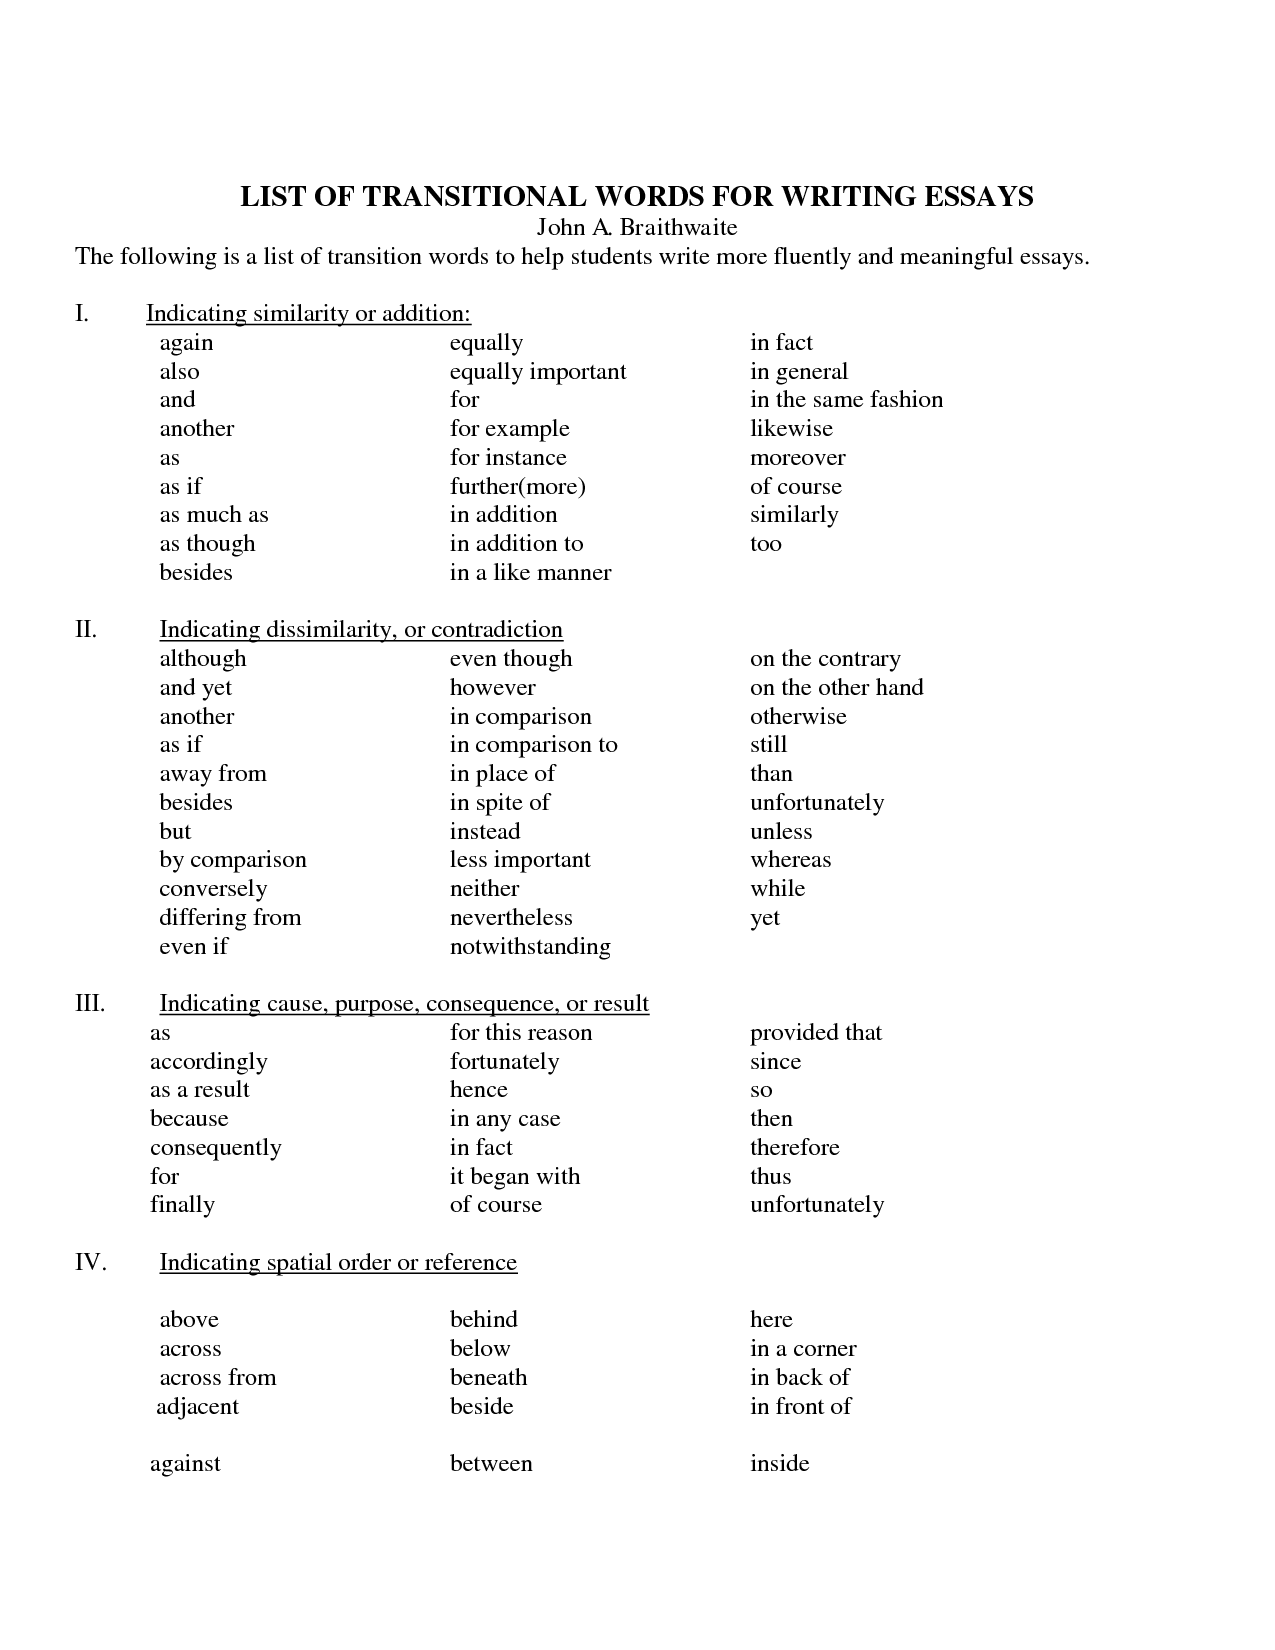 Transitional words for an essay